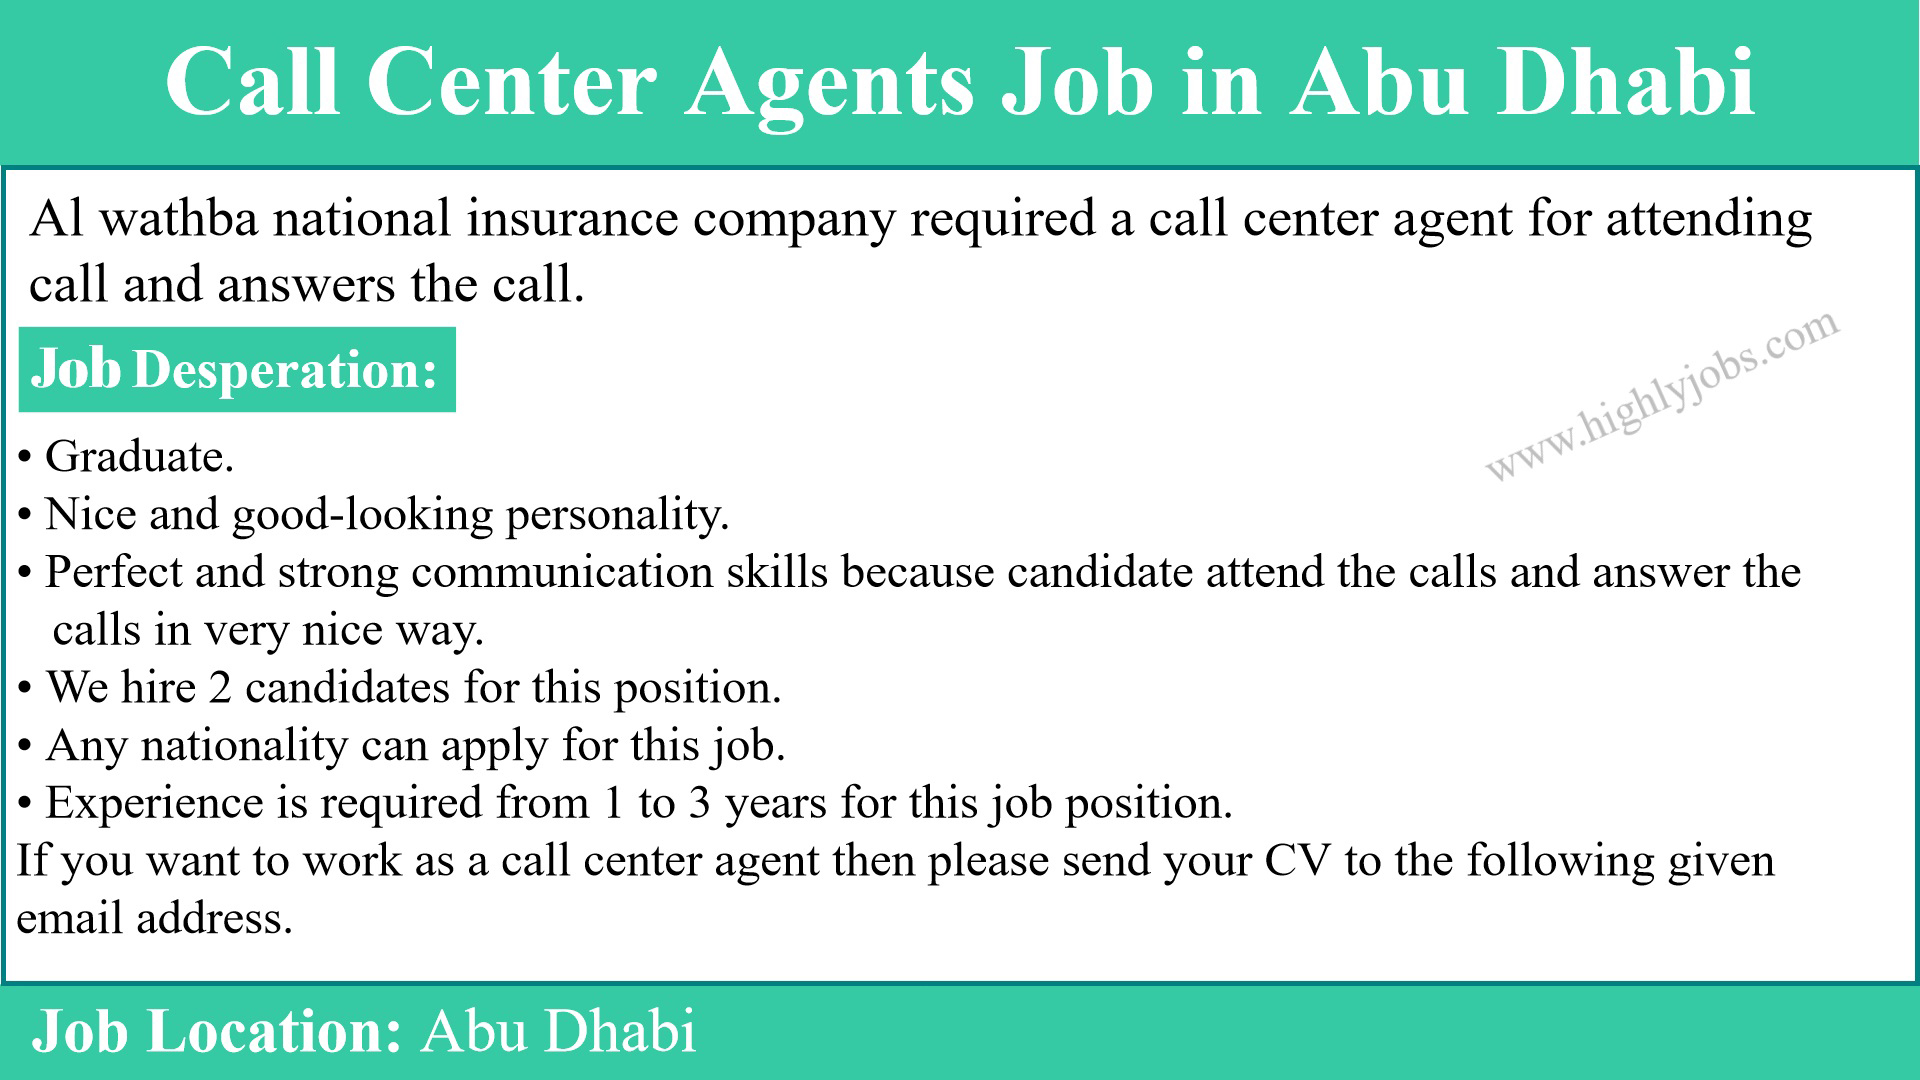 Call Center Agents Job in Abu Dhabi